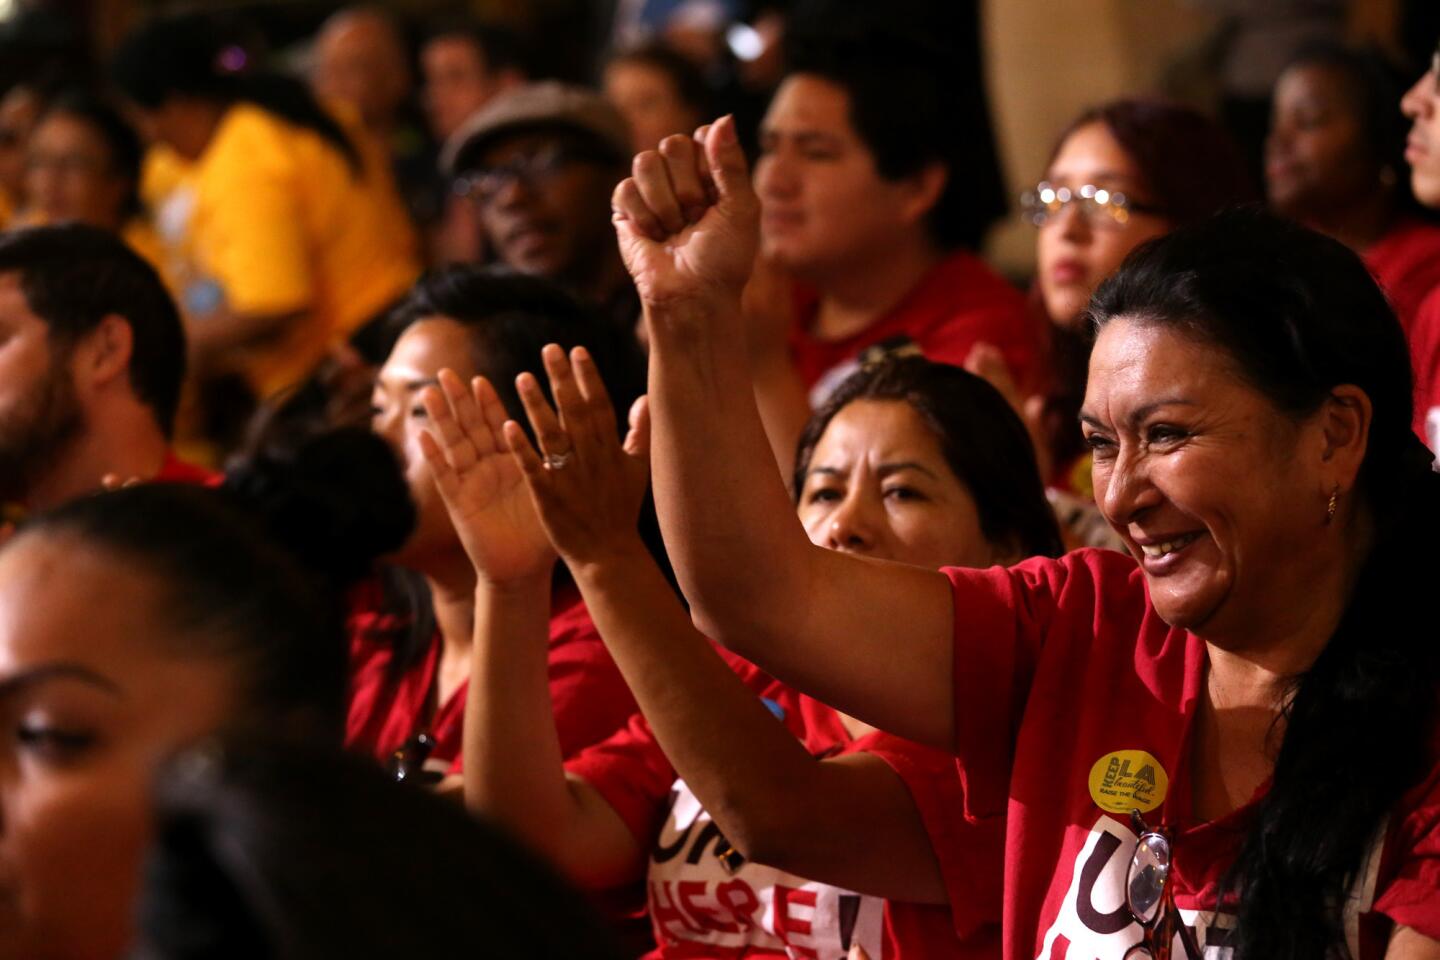 Maria Castaneda, with Unite Here, raises her fist as others applaud a speech of support for raising the minimum wage.